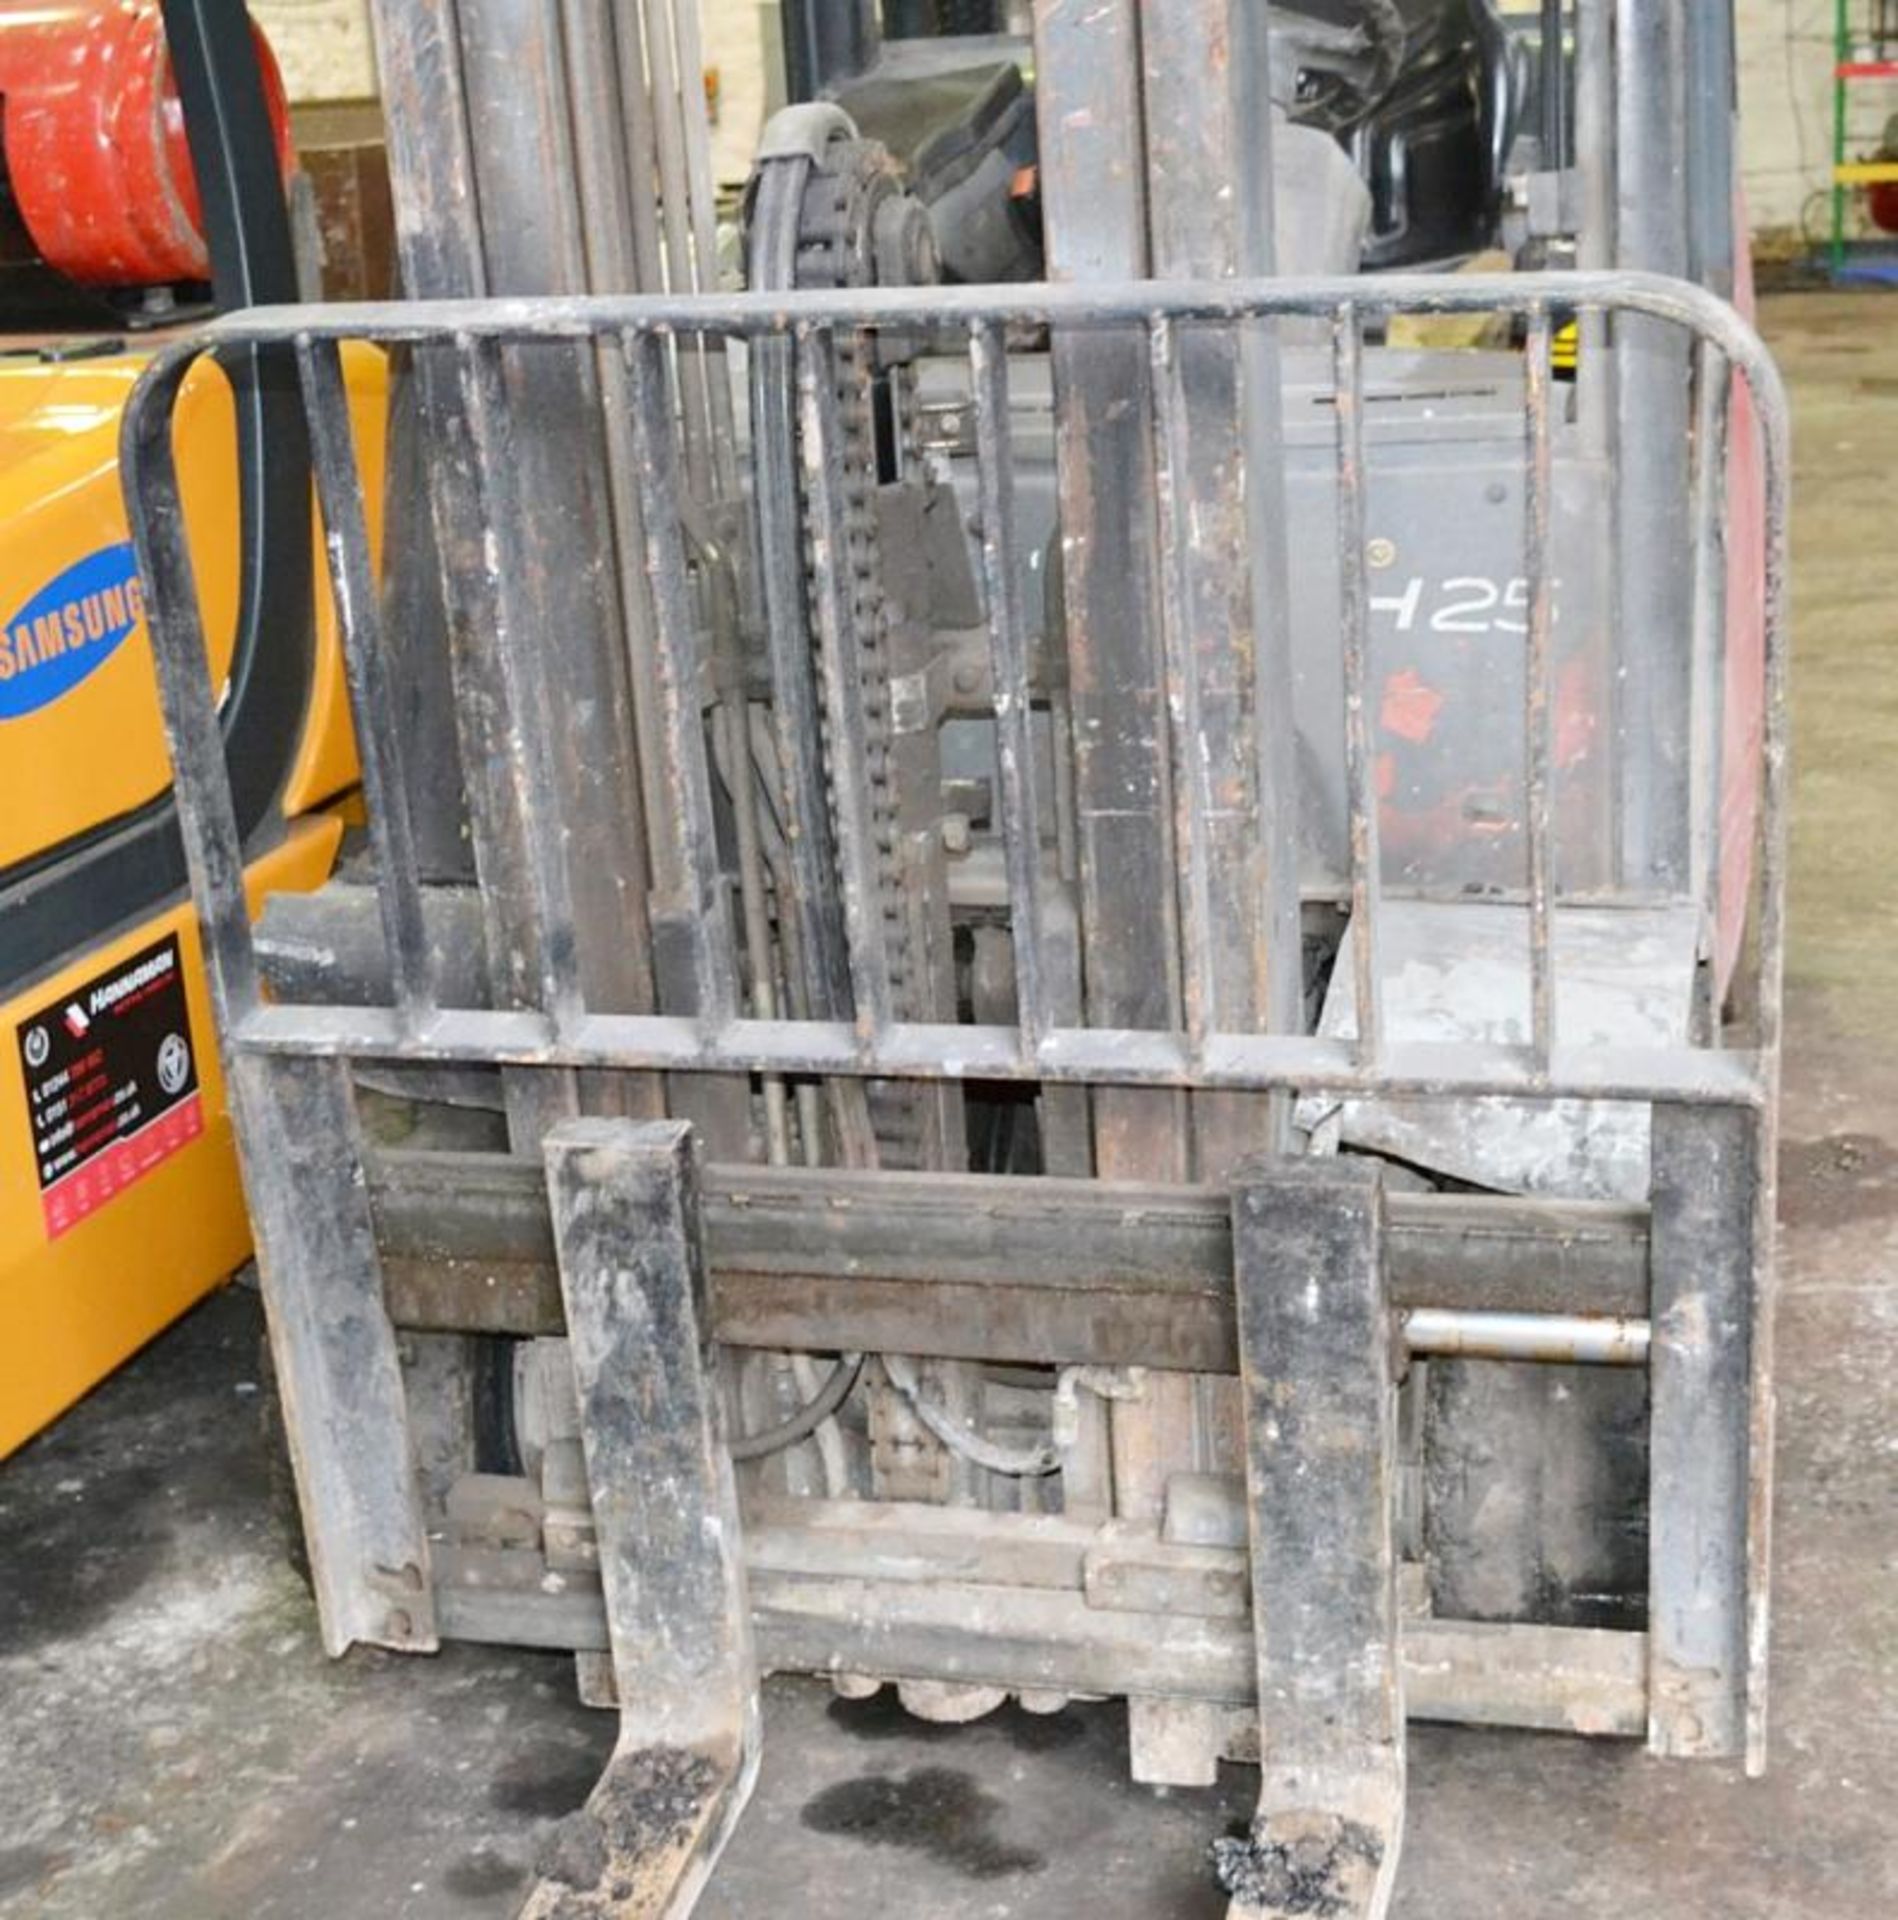 1 x 2003 Lansing Linde H25D Forklift - CL464 - Location: Liverpool L19 - Used In Working Condition - Bild 15 aus 30